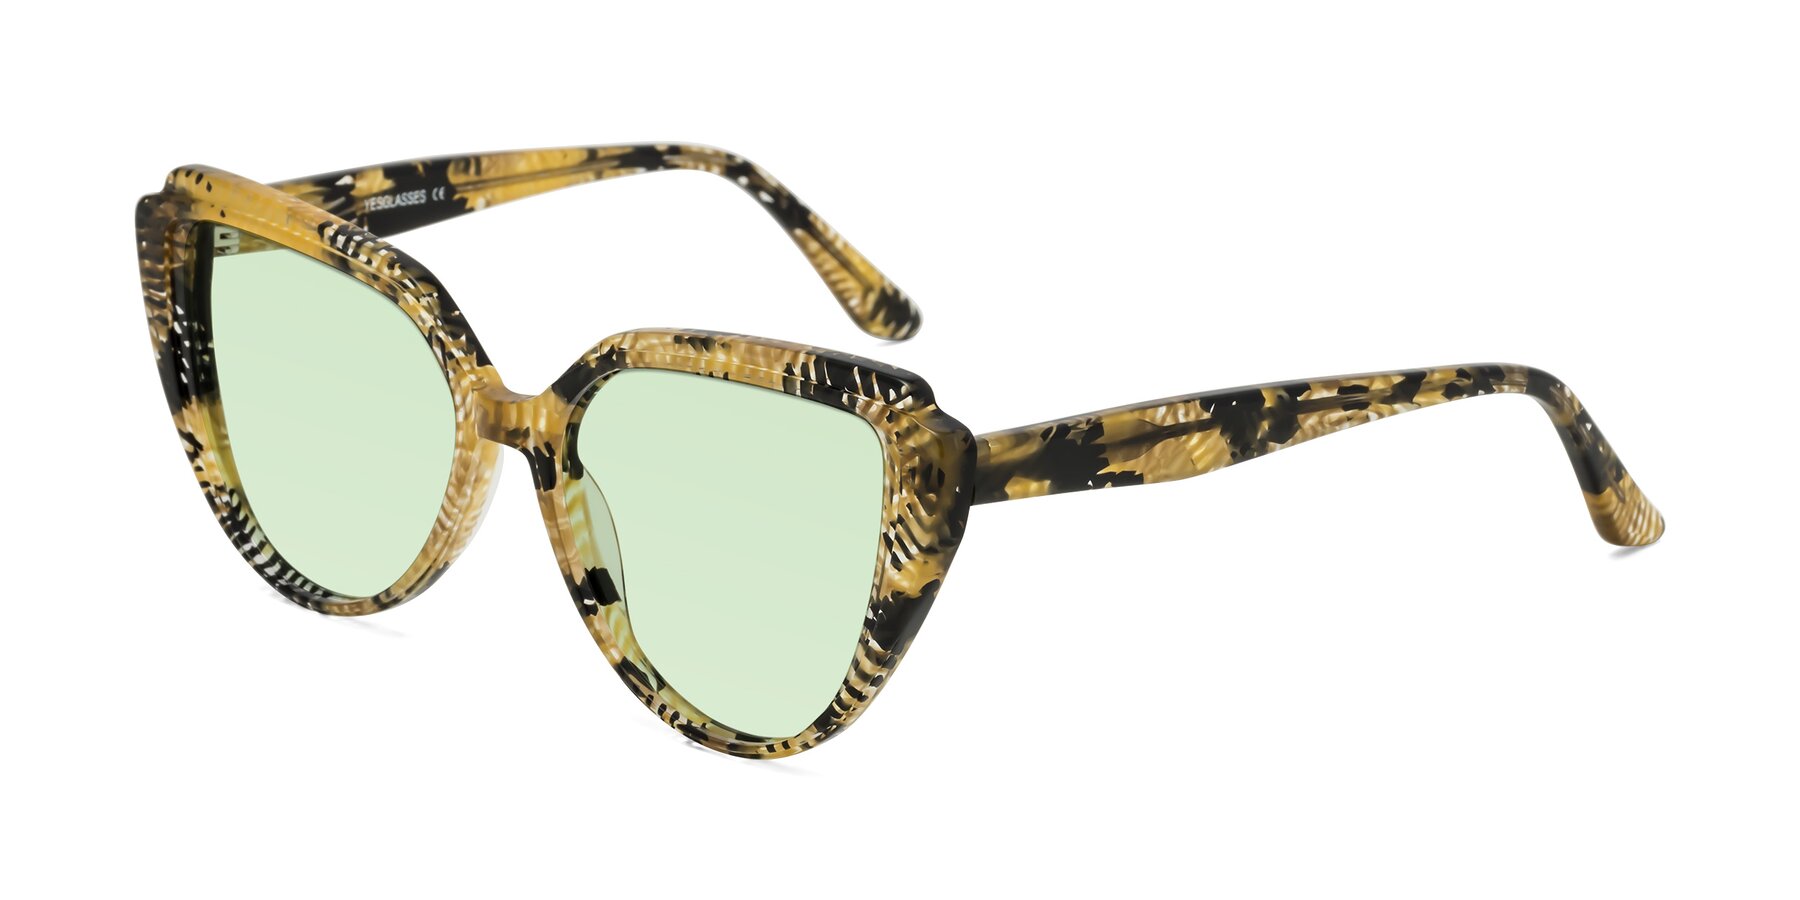 Angle of Zubar in Yellow Snake Print with Light Green Tinted Lenses